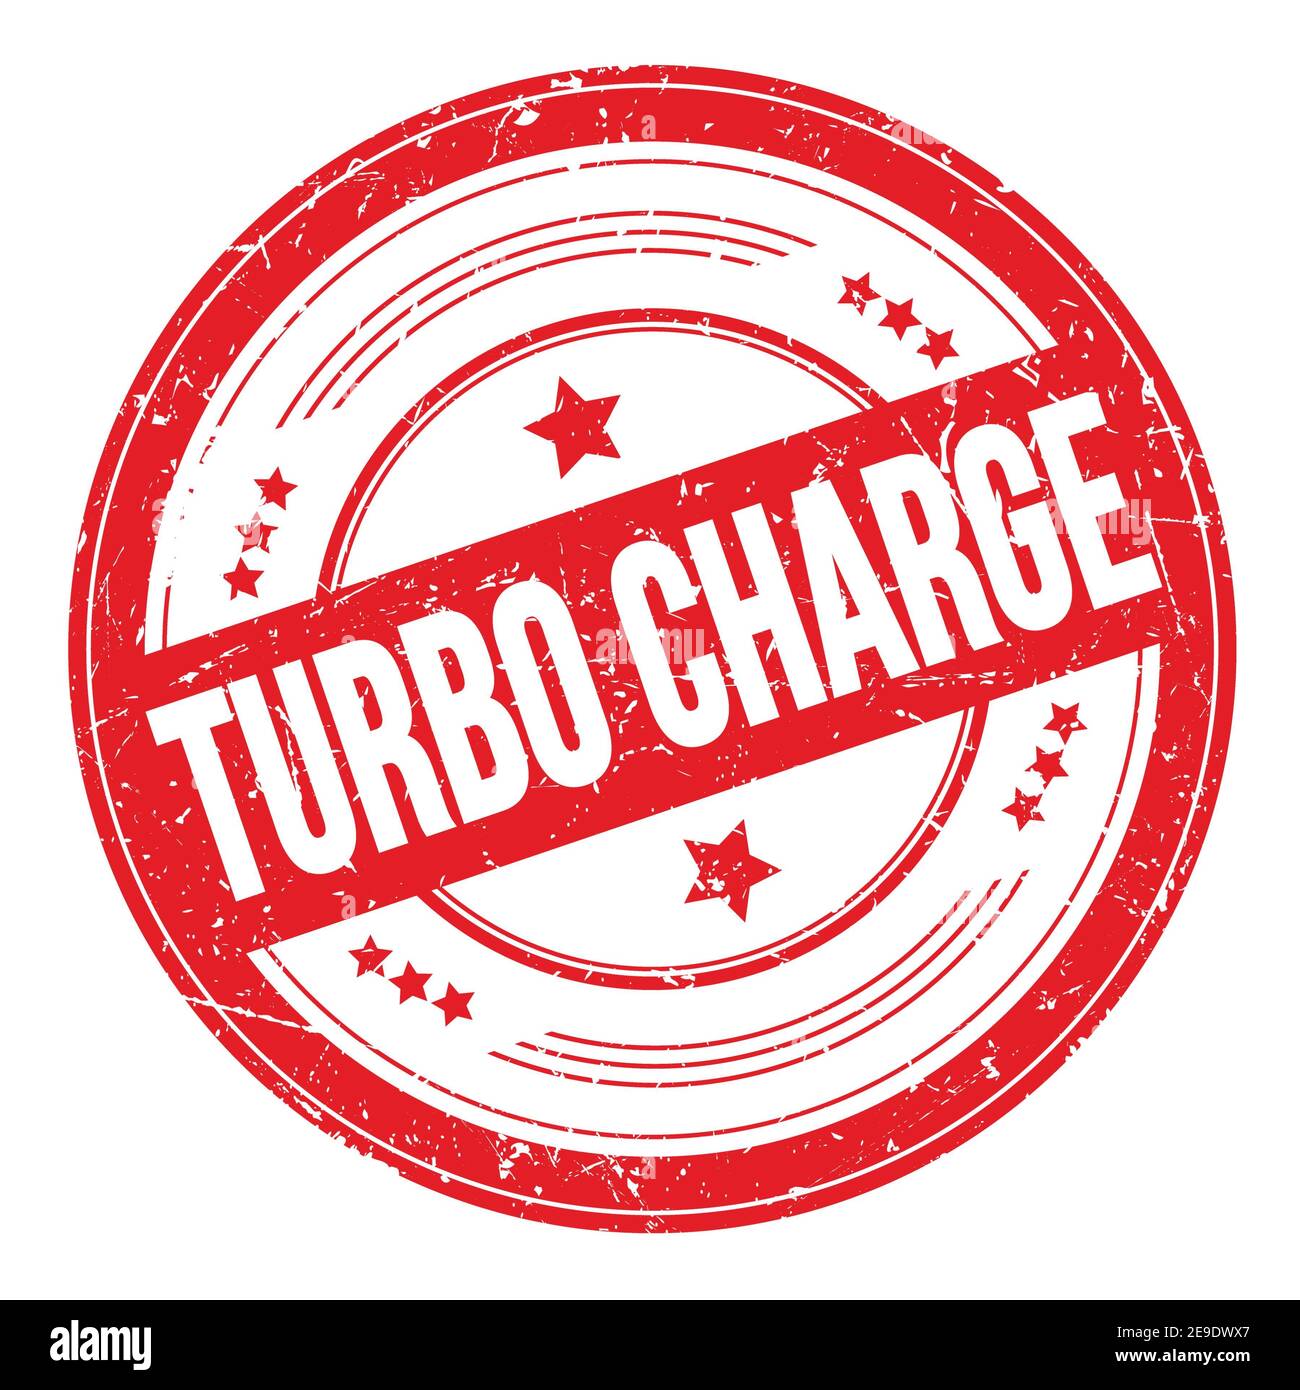 TURBO CHARGE text on red round grungy texture stamp. Stock Photo